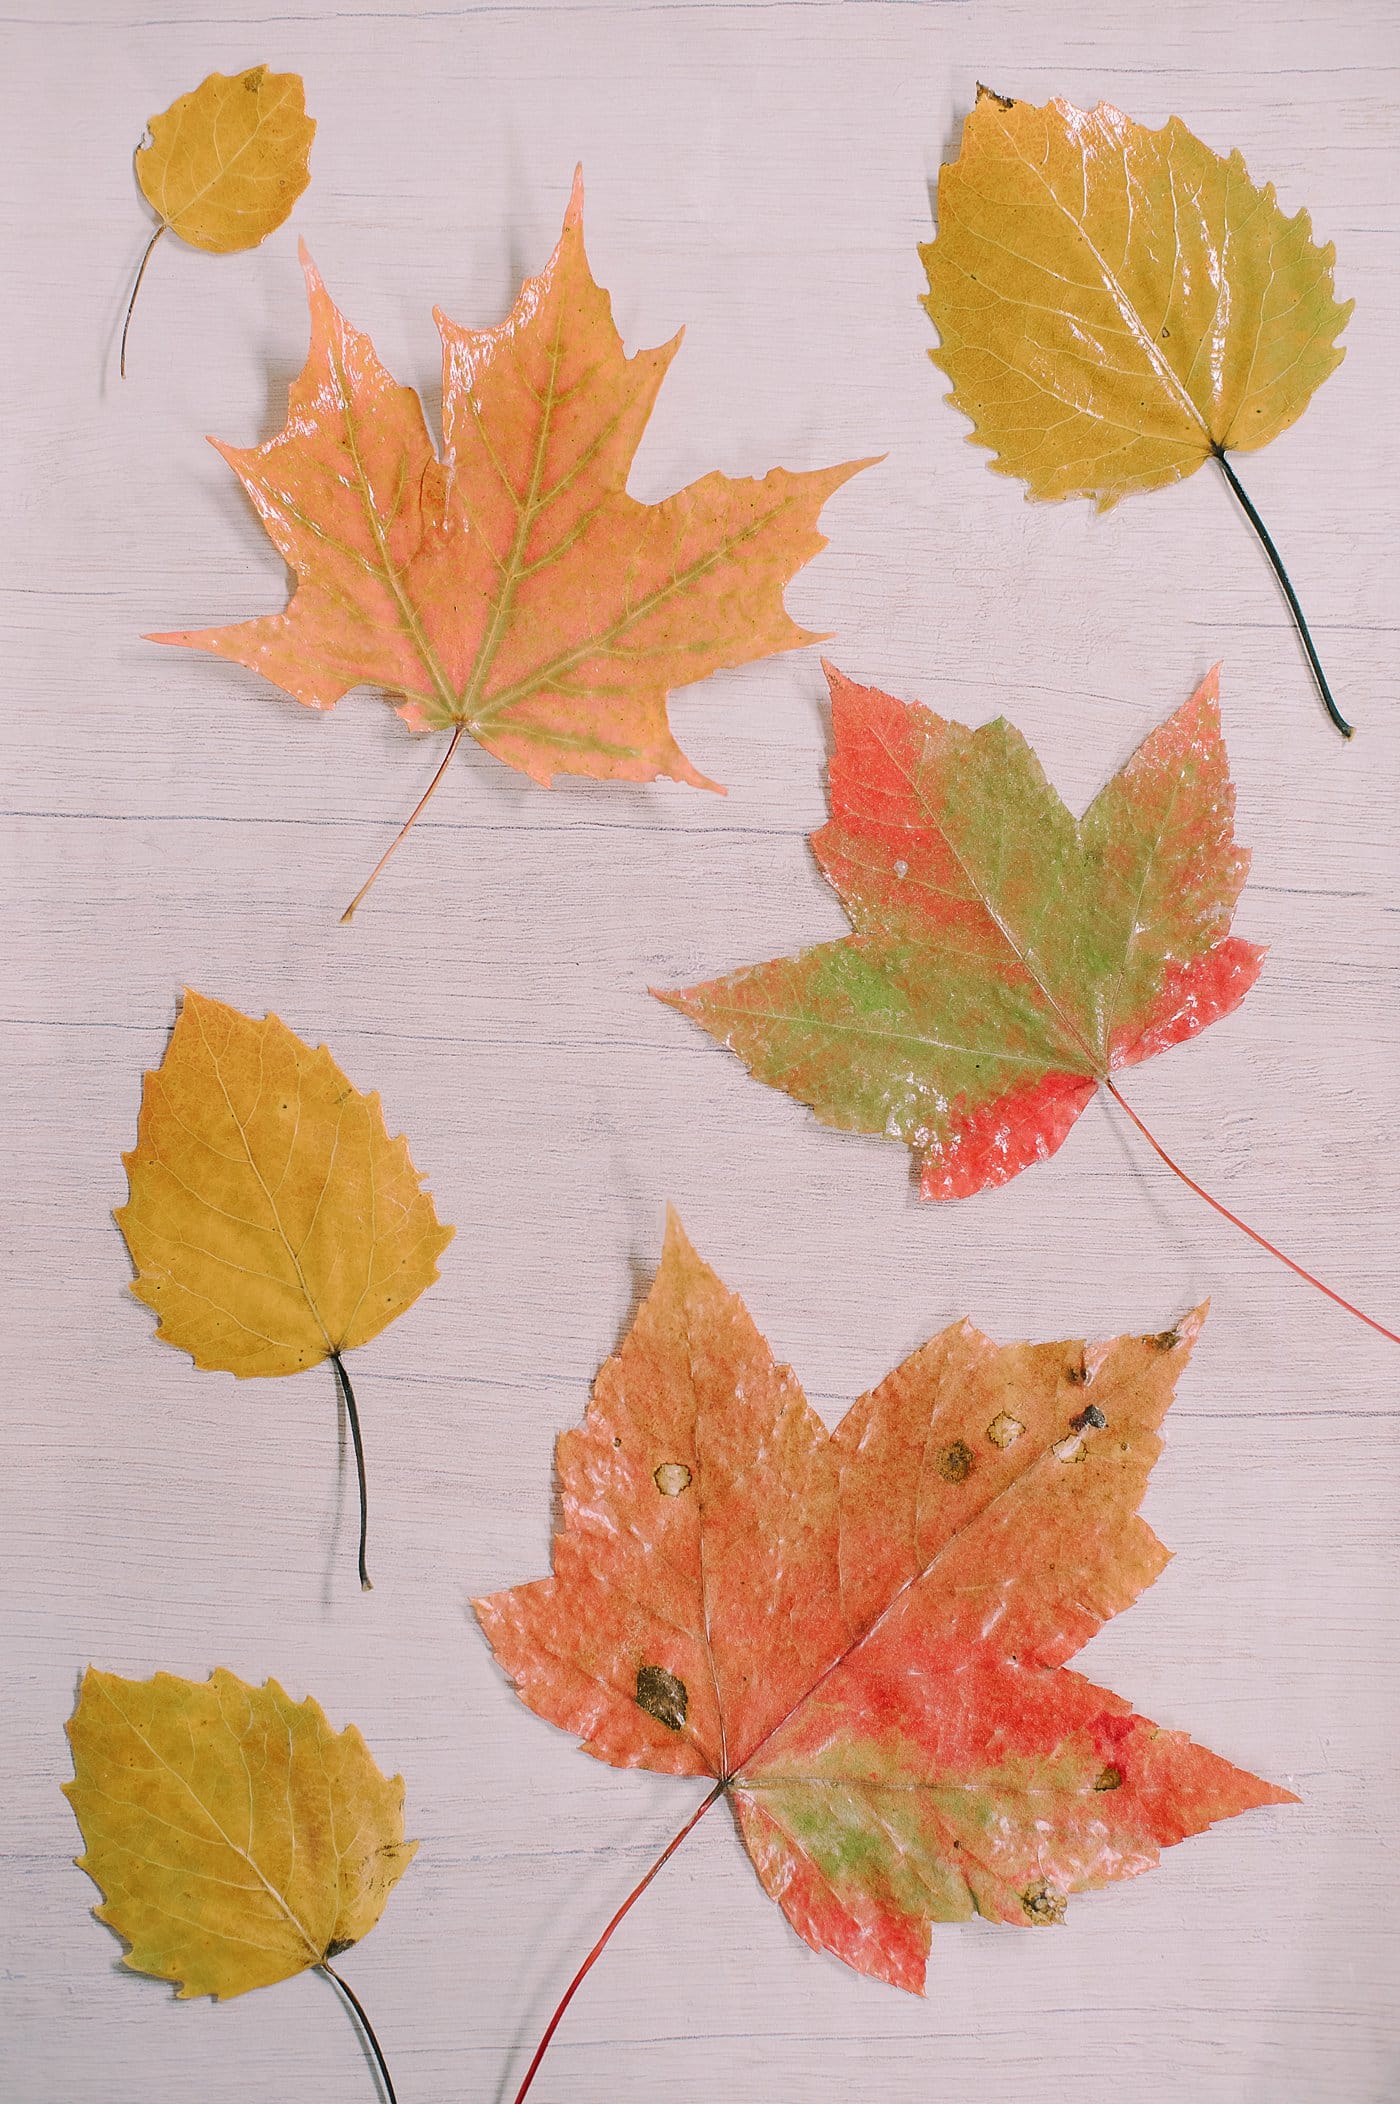 A look at matte vs gloss Mod Podge for preserving fall leaves.